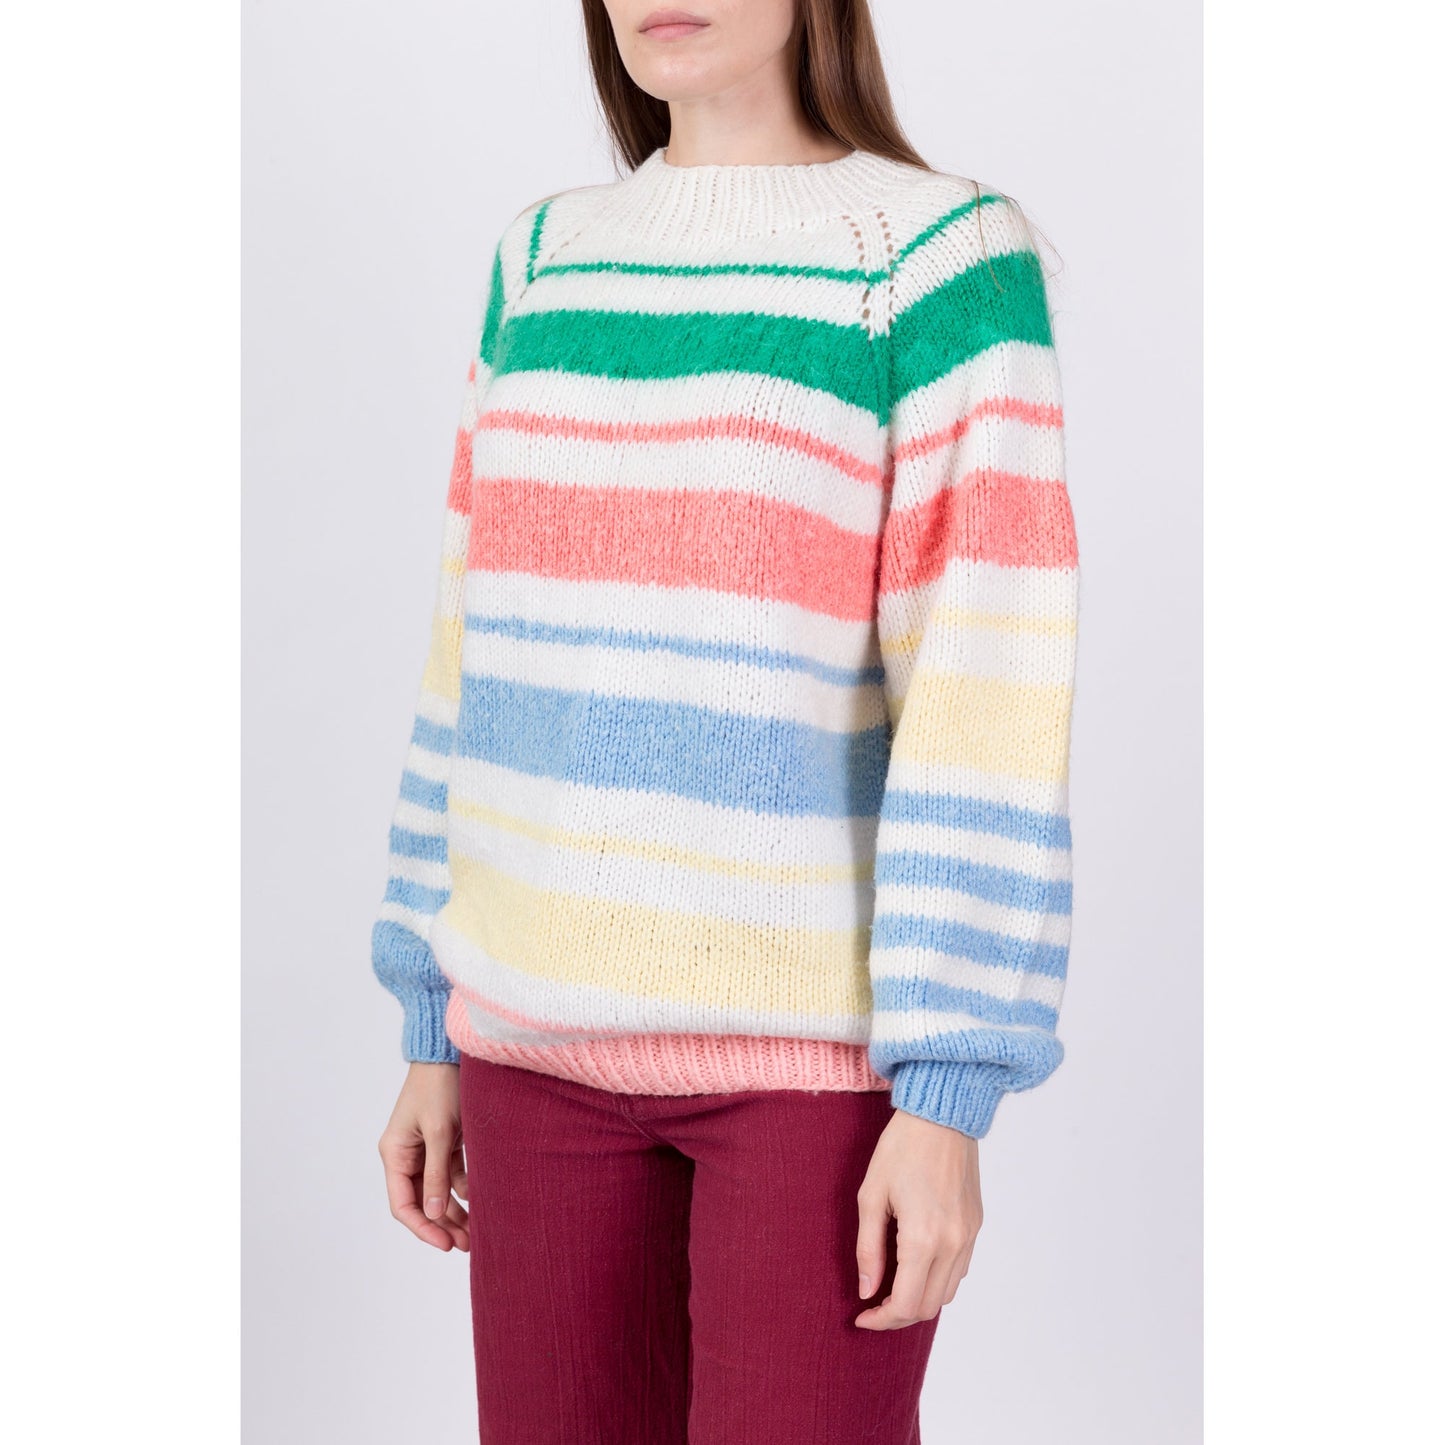 Retro 80s Gradient Striped Knit Sweater - Large 